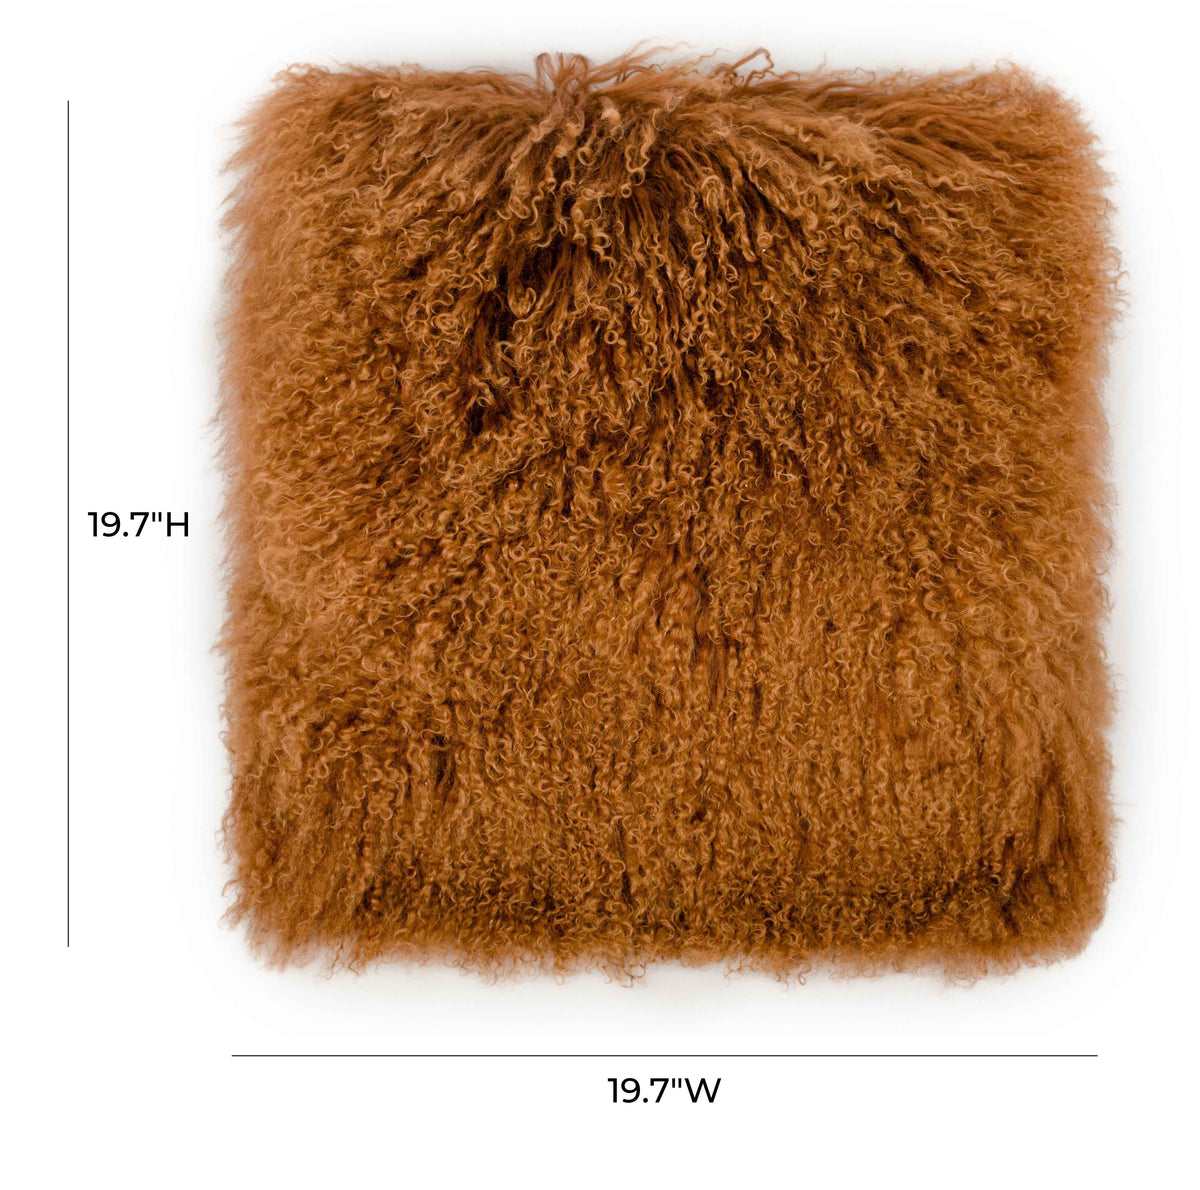 January Copper Sheep Fur Large Pillow - Luxury Living Collection